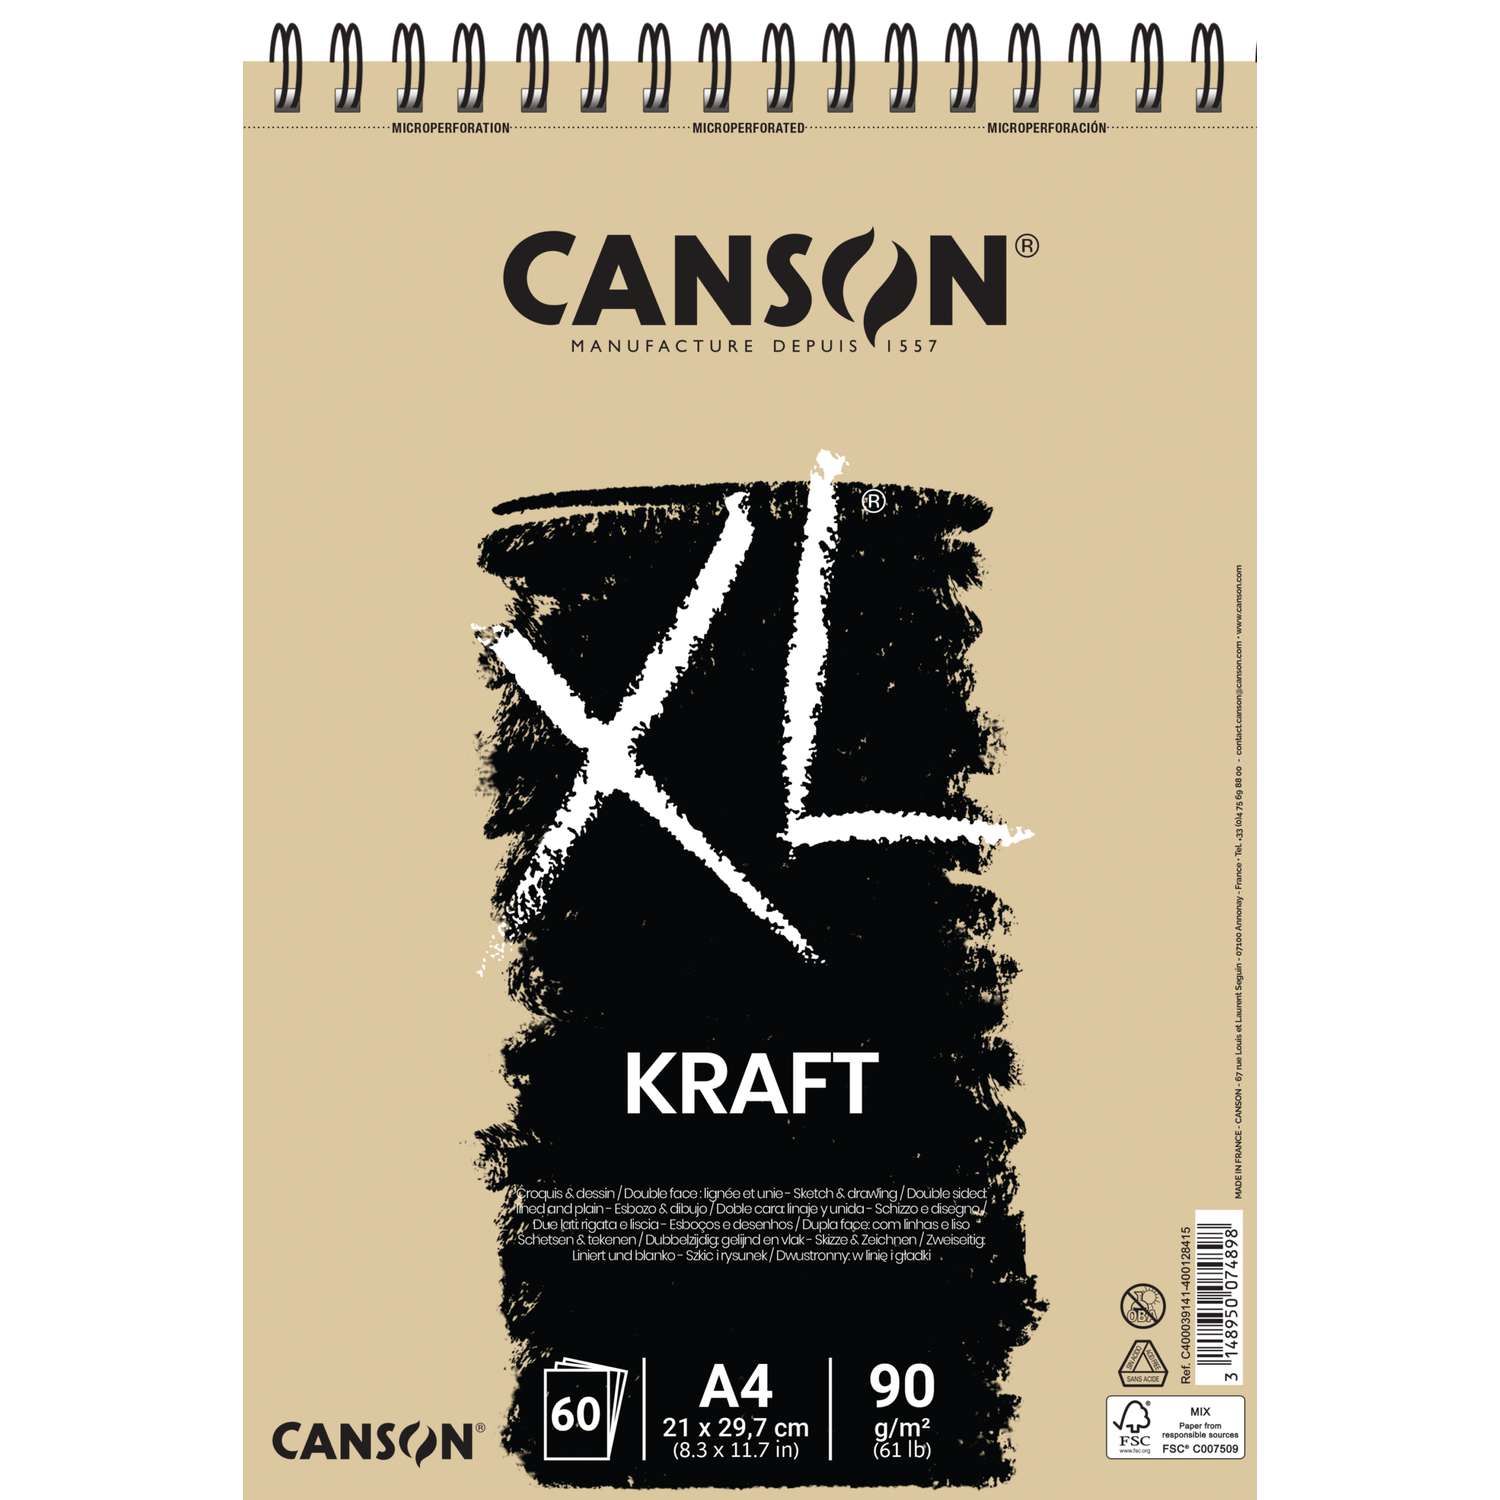 Canson XL Extra White Sketch Pad A5 90gsm 60 Sheets artists drawing paper pad 